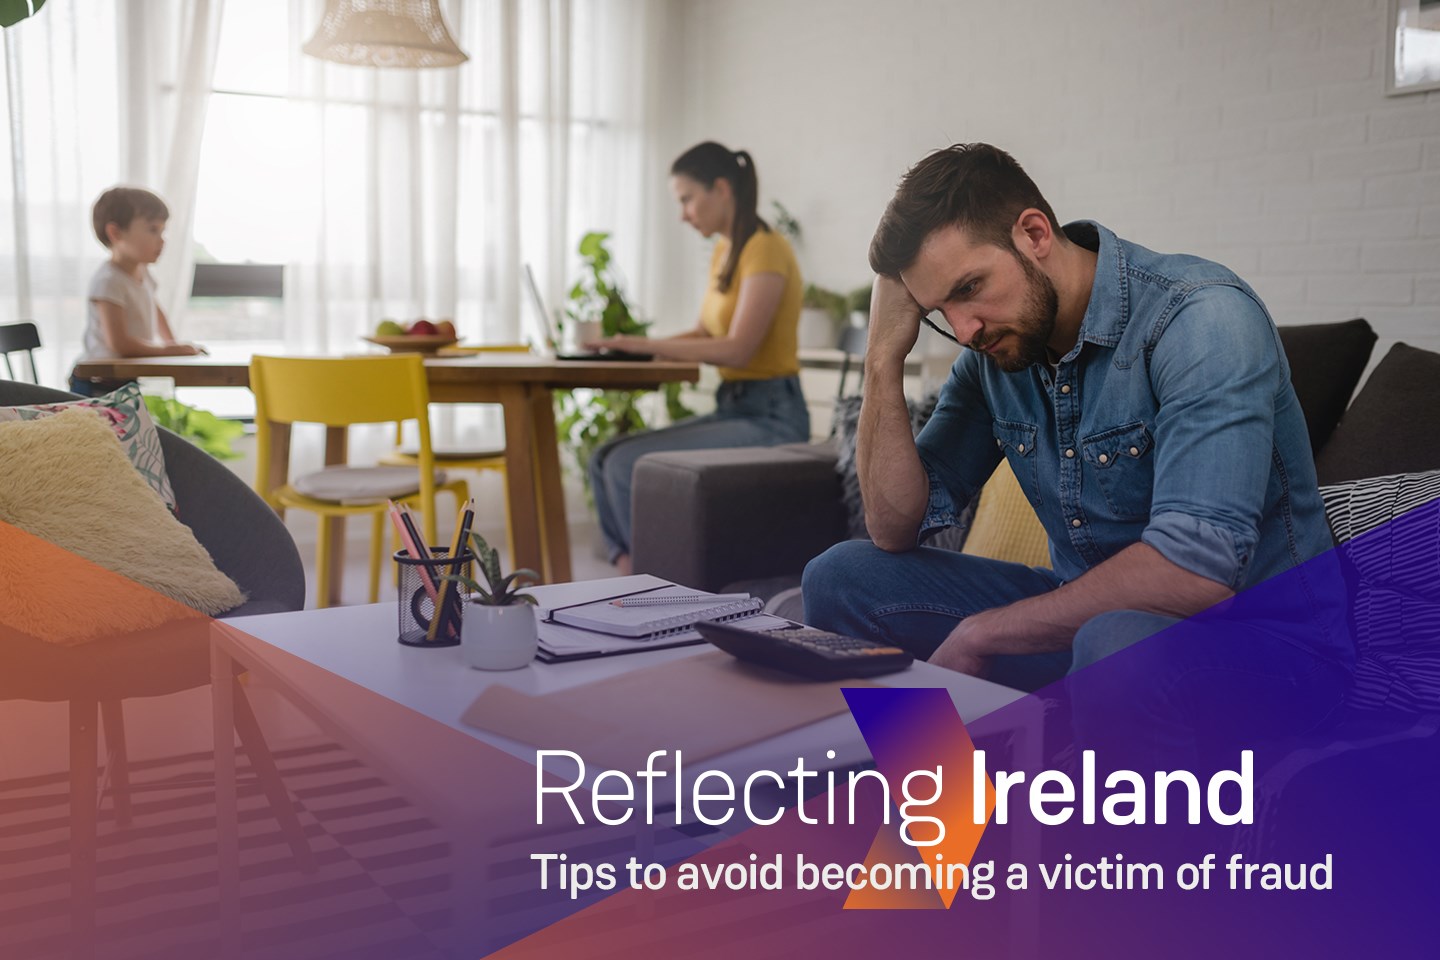 Living room, family with yourng boy sitting at a table with his mom that is working on a laptop and father sitting on a sofa  looking worried on a calculator, text on image 'Reflecting Ireland - Tips to avoid becoming a victim of fraud'